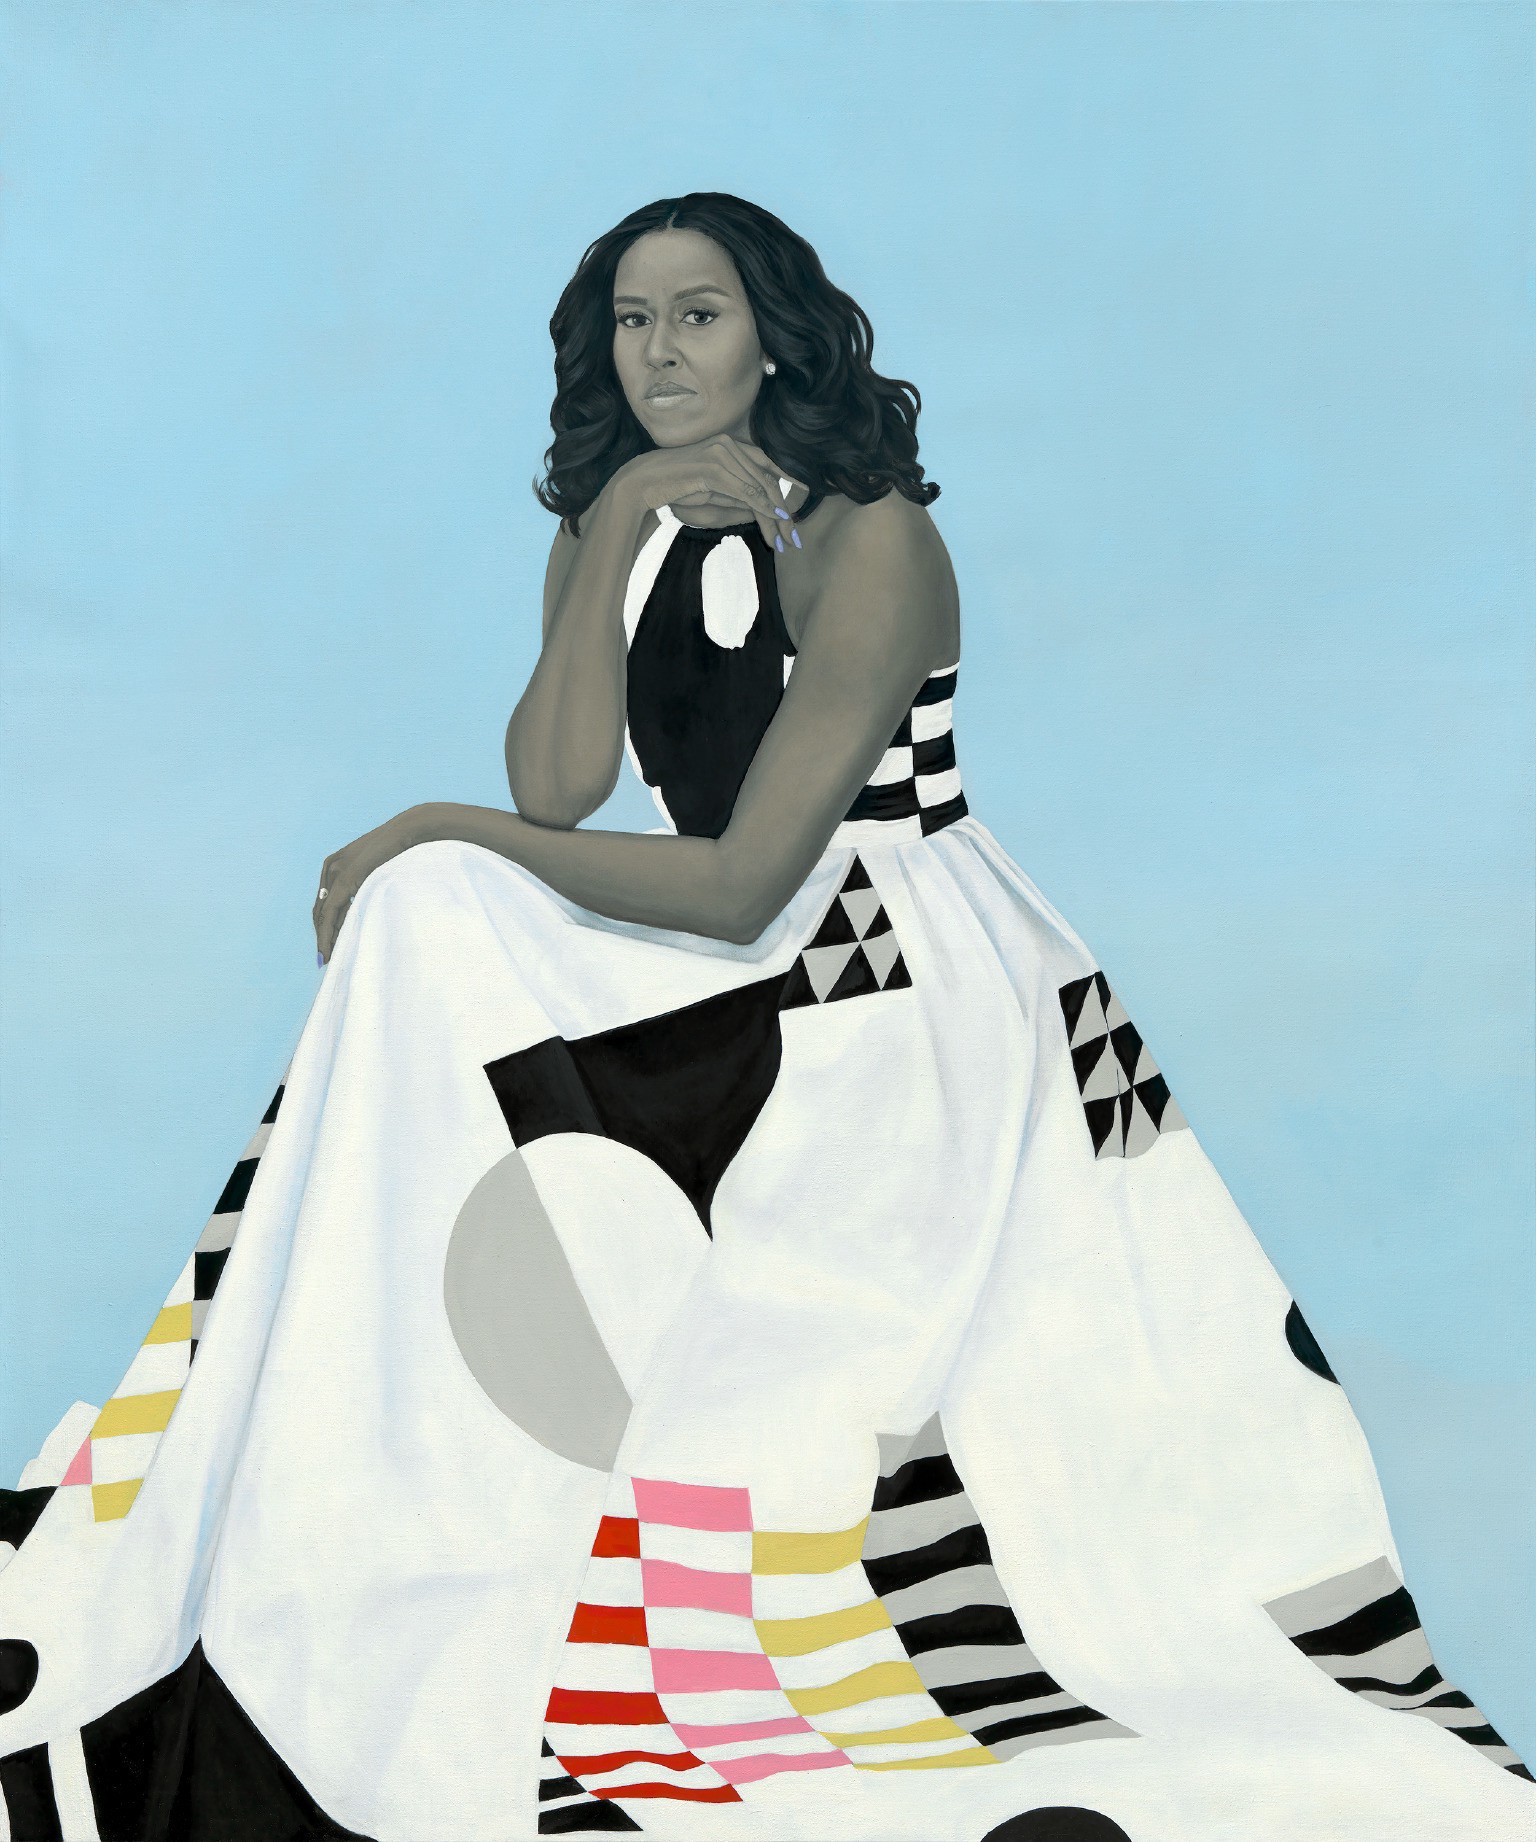 Michelle Obama portrait painted by Amy Sherald